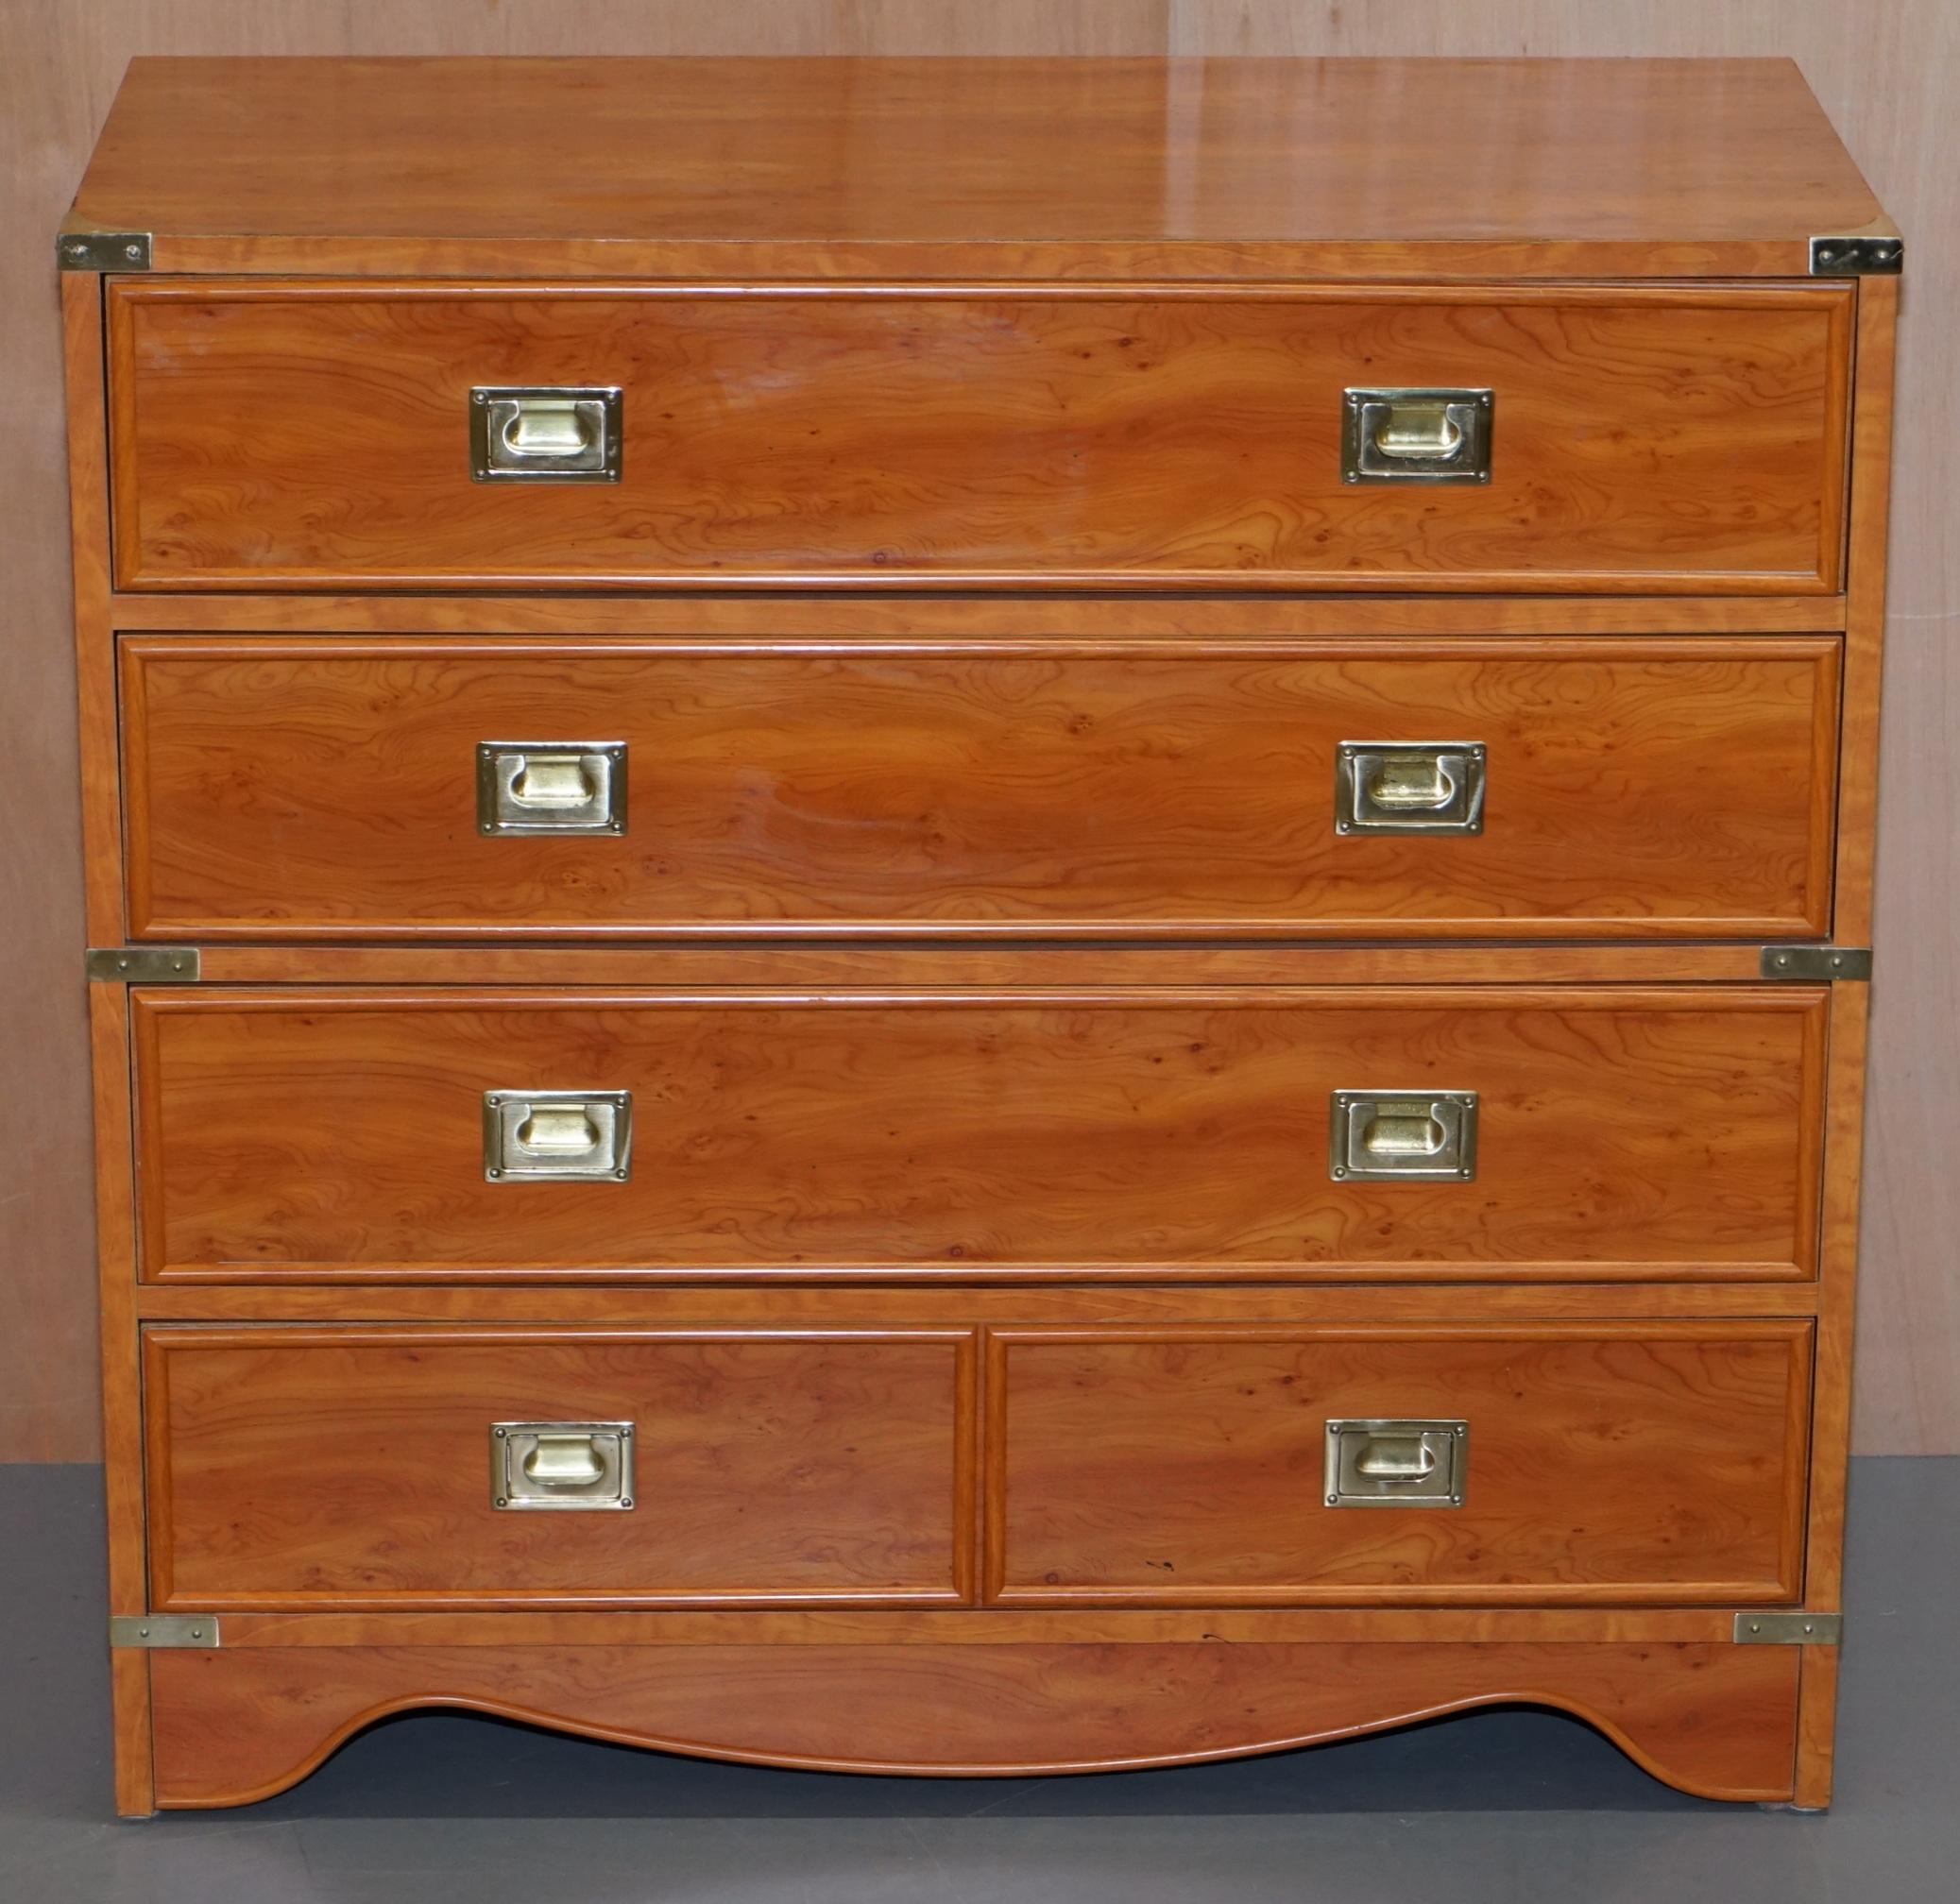 We are delighted to offer for sale this very nice chest of drawers by Meubles Gautier made in France in the military campaign style

A decorative and functional chest of drawers, it is quite a shallow chest so it doesn’t take up much room and it a